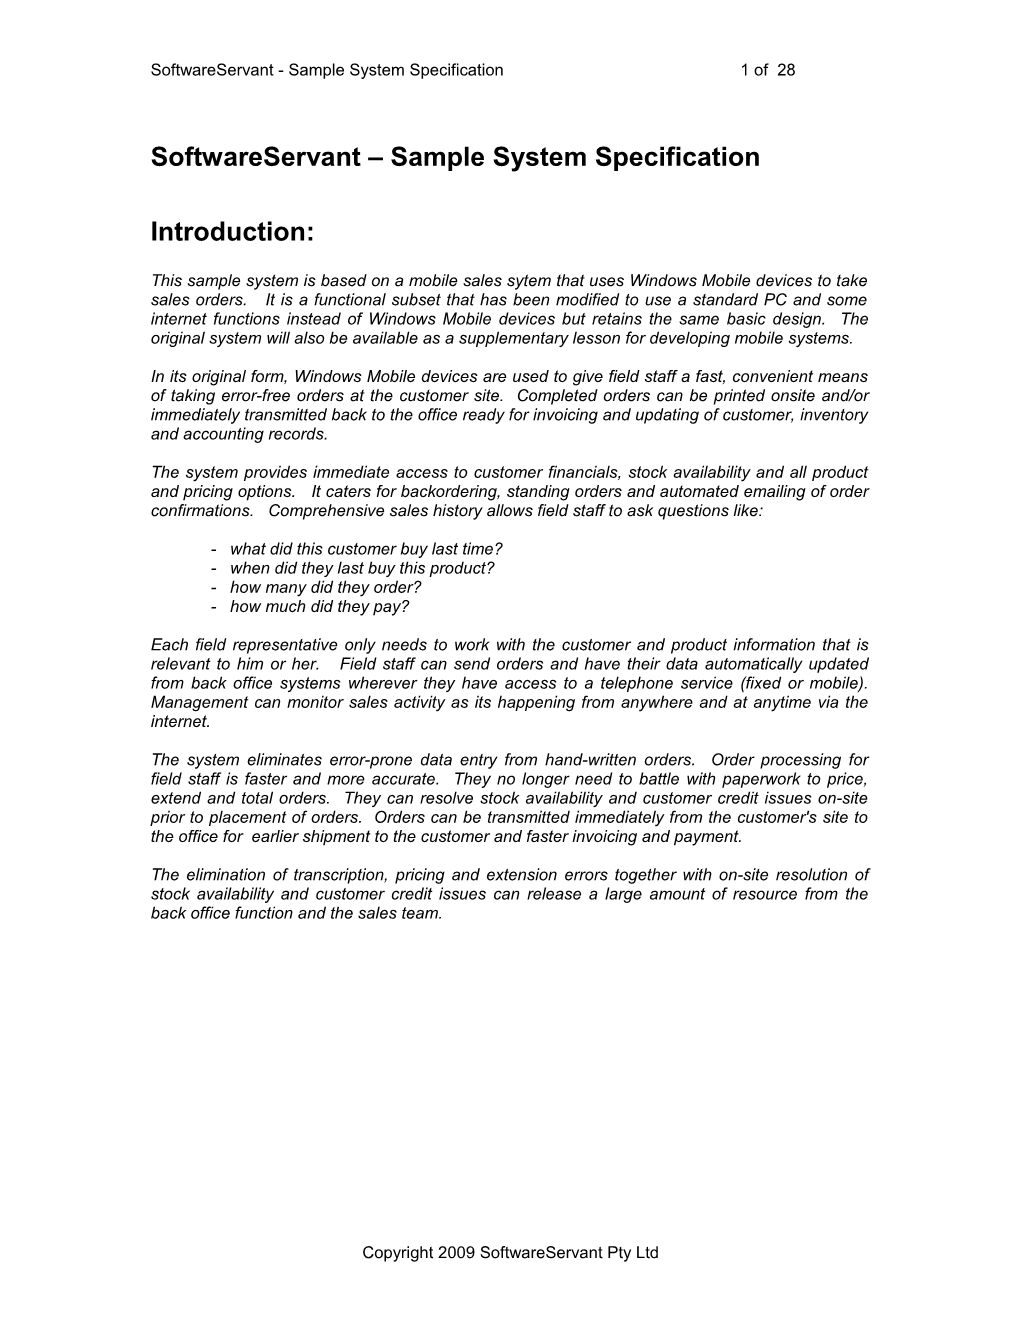 Softwareservant System Specification